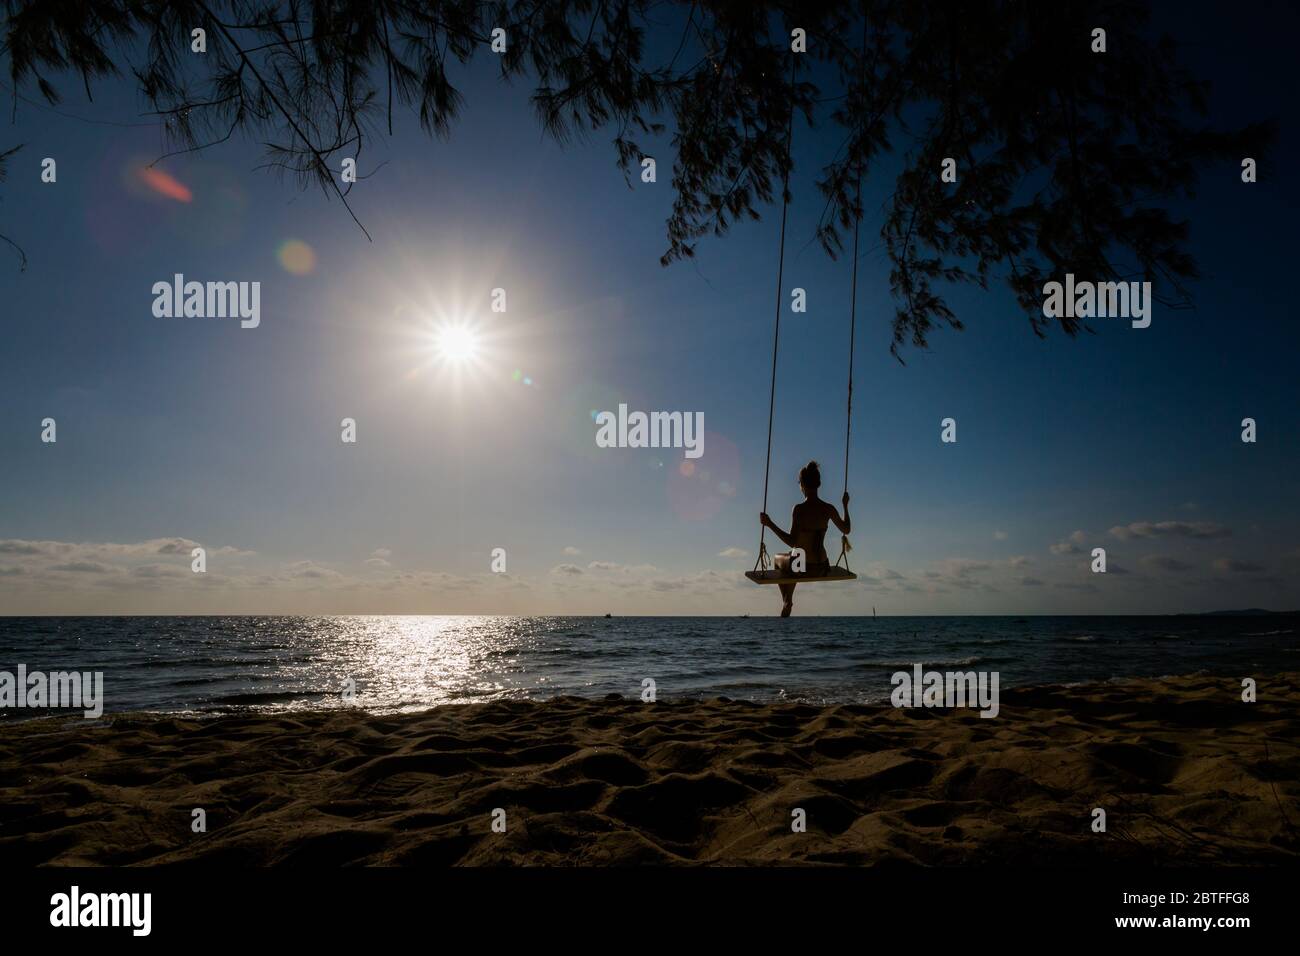 Siluette of woman on swing on tropical island Phu Quoc in Vietnam. Tourist on Ong Lang, Cua Can beach during hot sunny day. Stock Photo